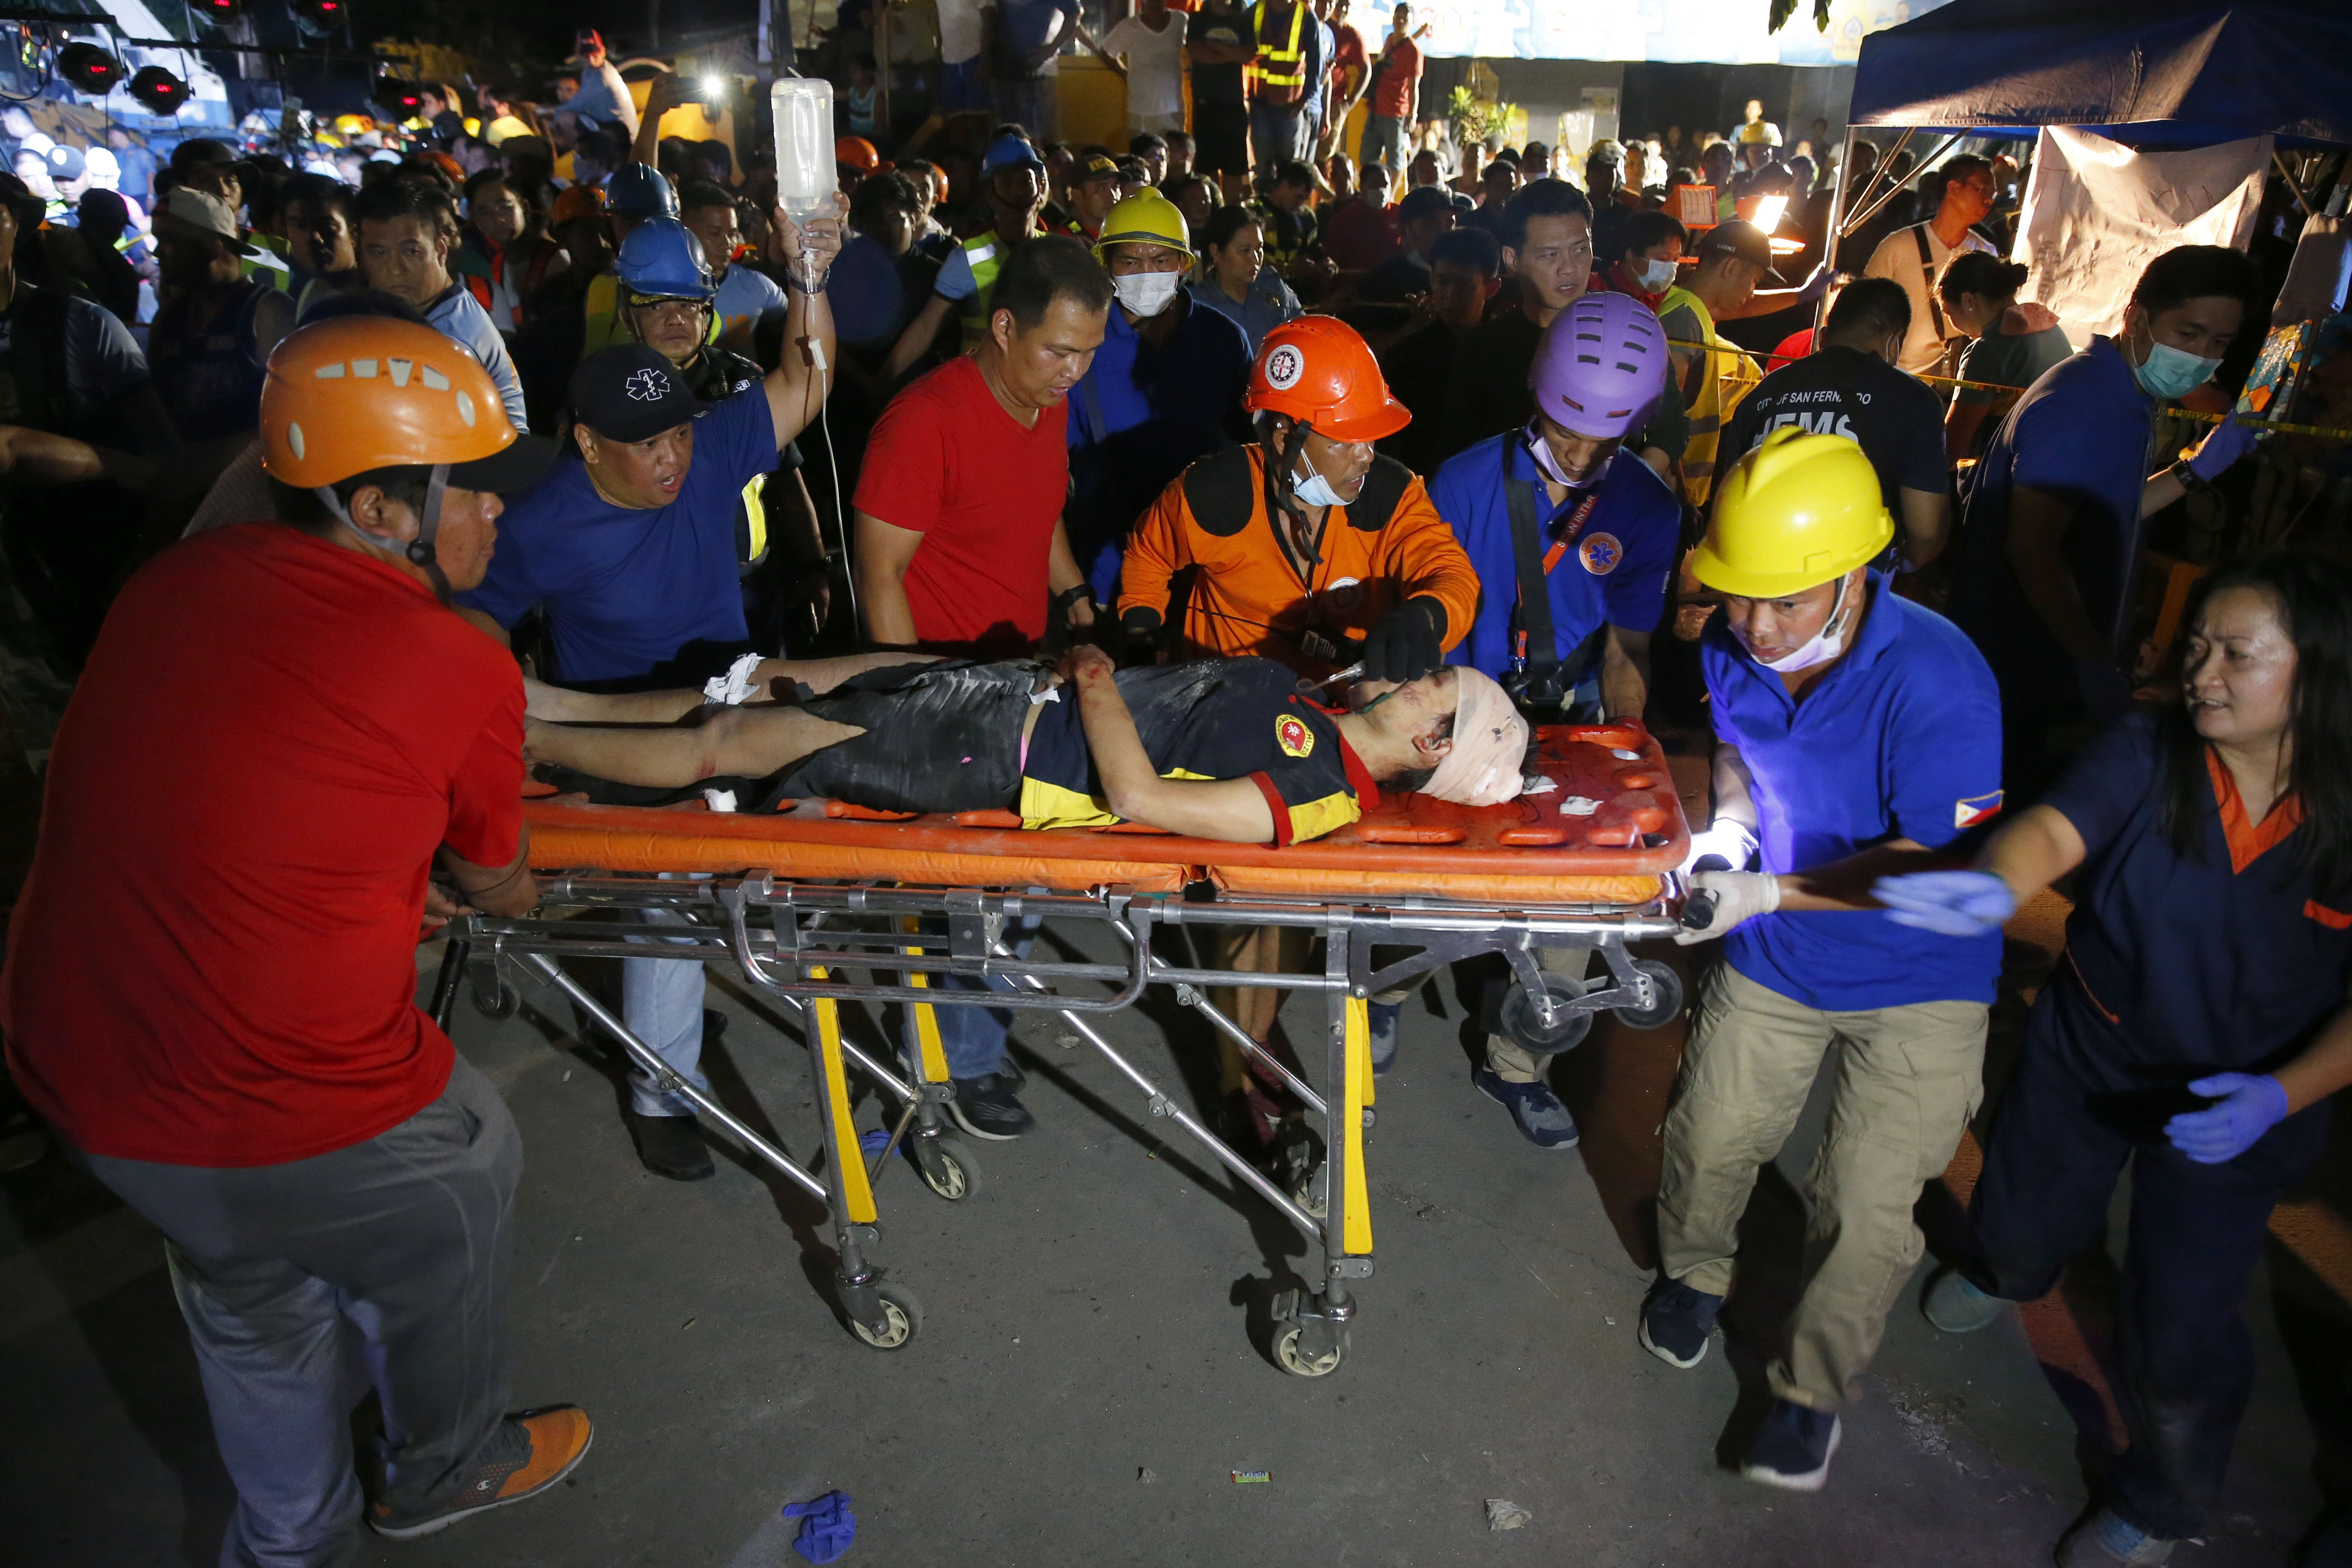 Rescuers carry a victim to a waiting ambulance after following a magnitude 6.1 earthquake that caused the collapse of a commercial building in Porac township, Pampangan province north of Manila, Philippines Monday, April 22, 2019. A strong earthquake struck the northern Philippines Monday trapping some people in a collapsed building, damaged an airport terminal and knocked out power in at least one province, officials said. (AP Photo/Bullit Marquez)